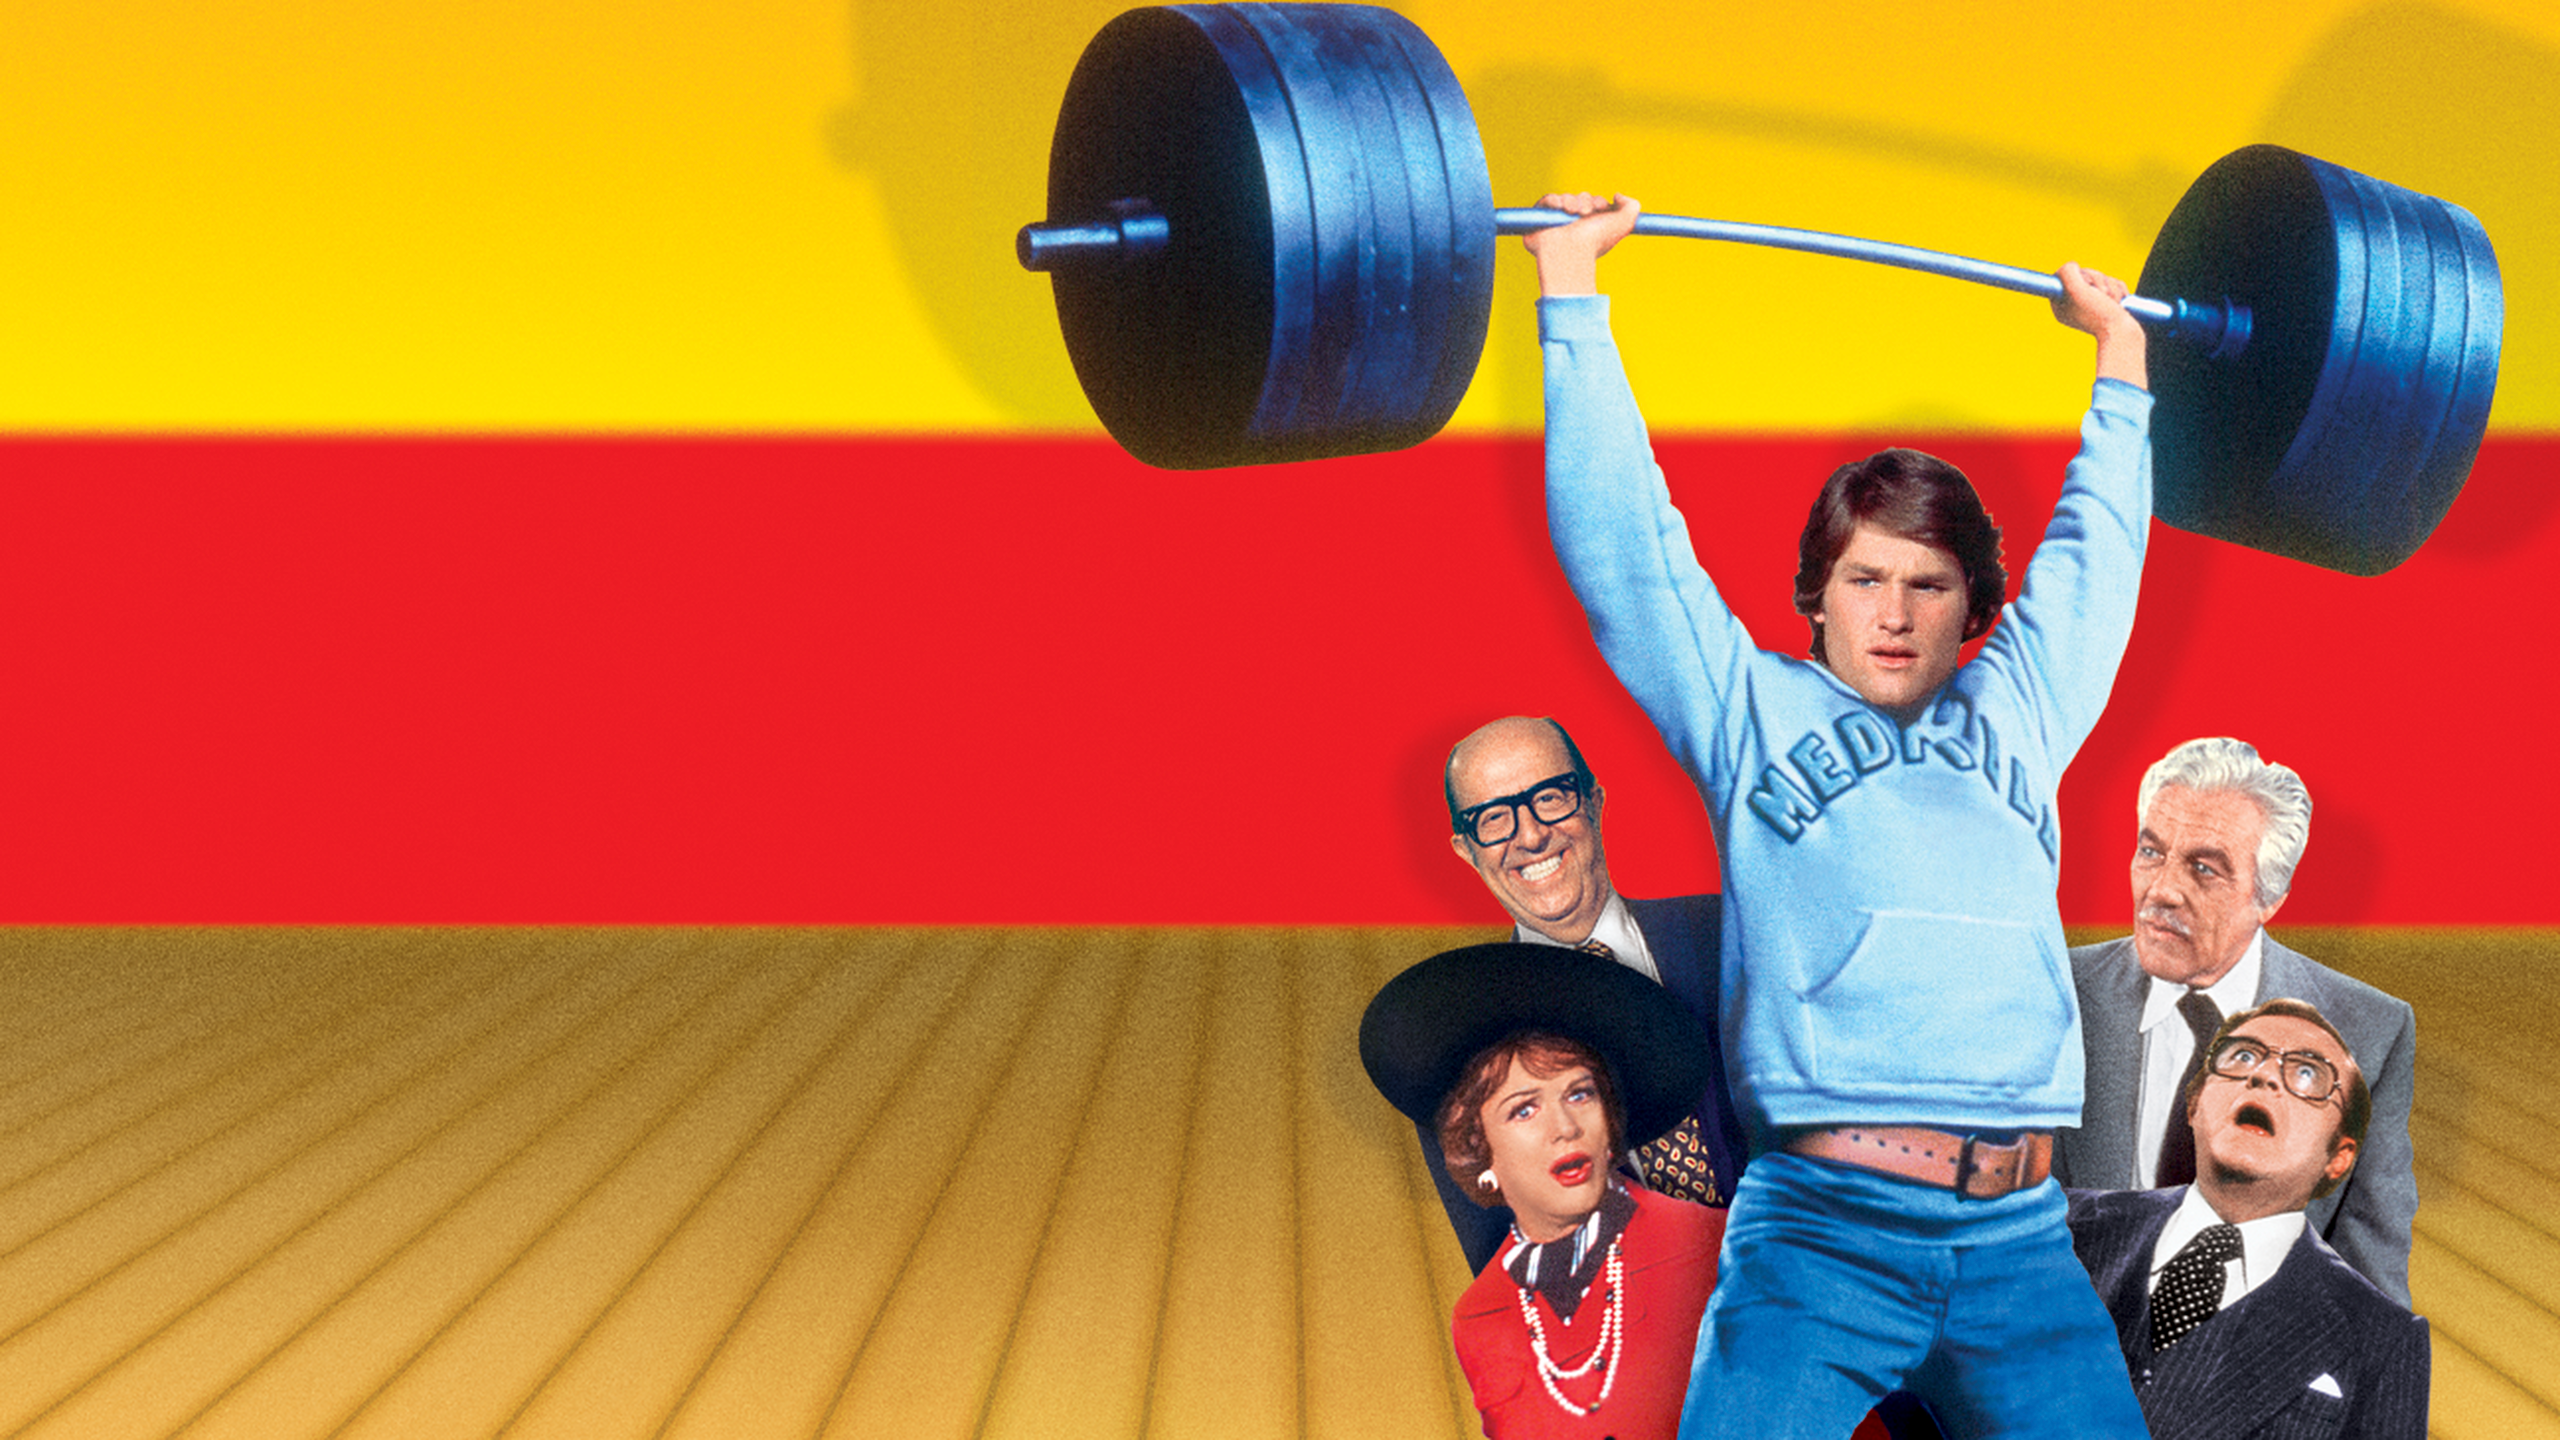 The Strongest Man in the World (1975) - Turner Classic Movies